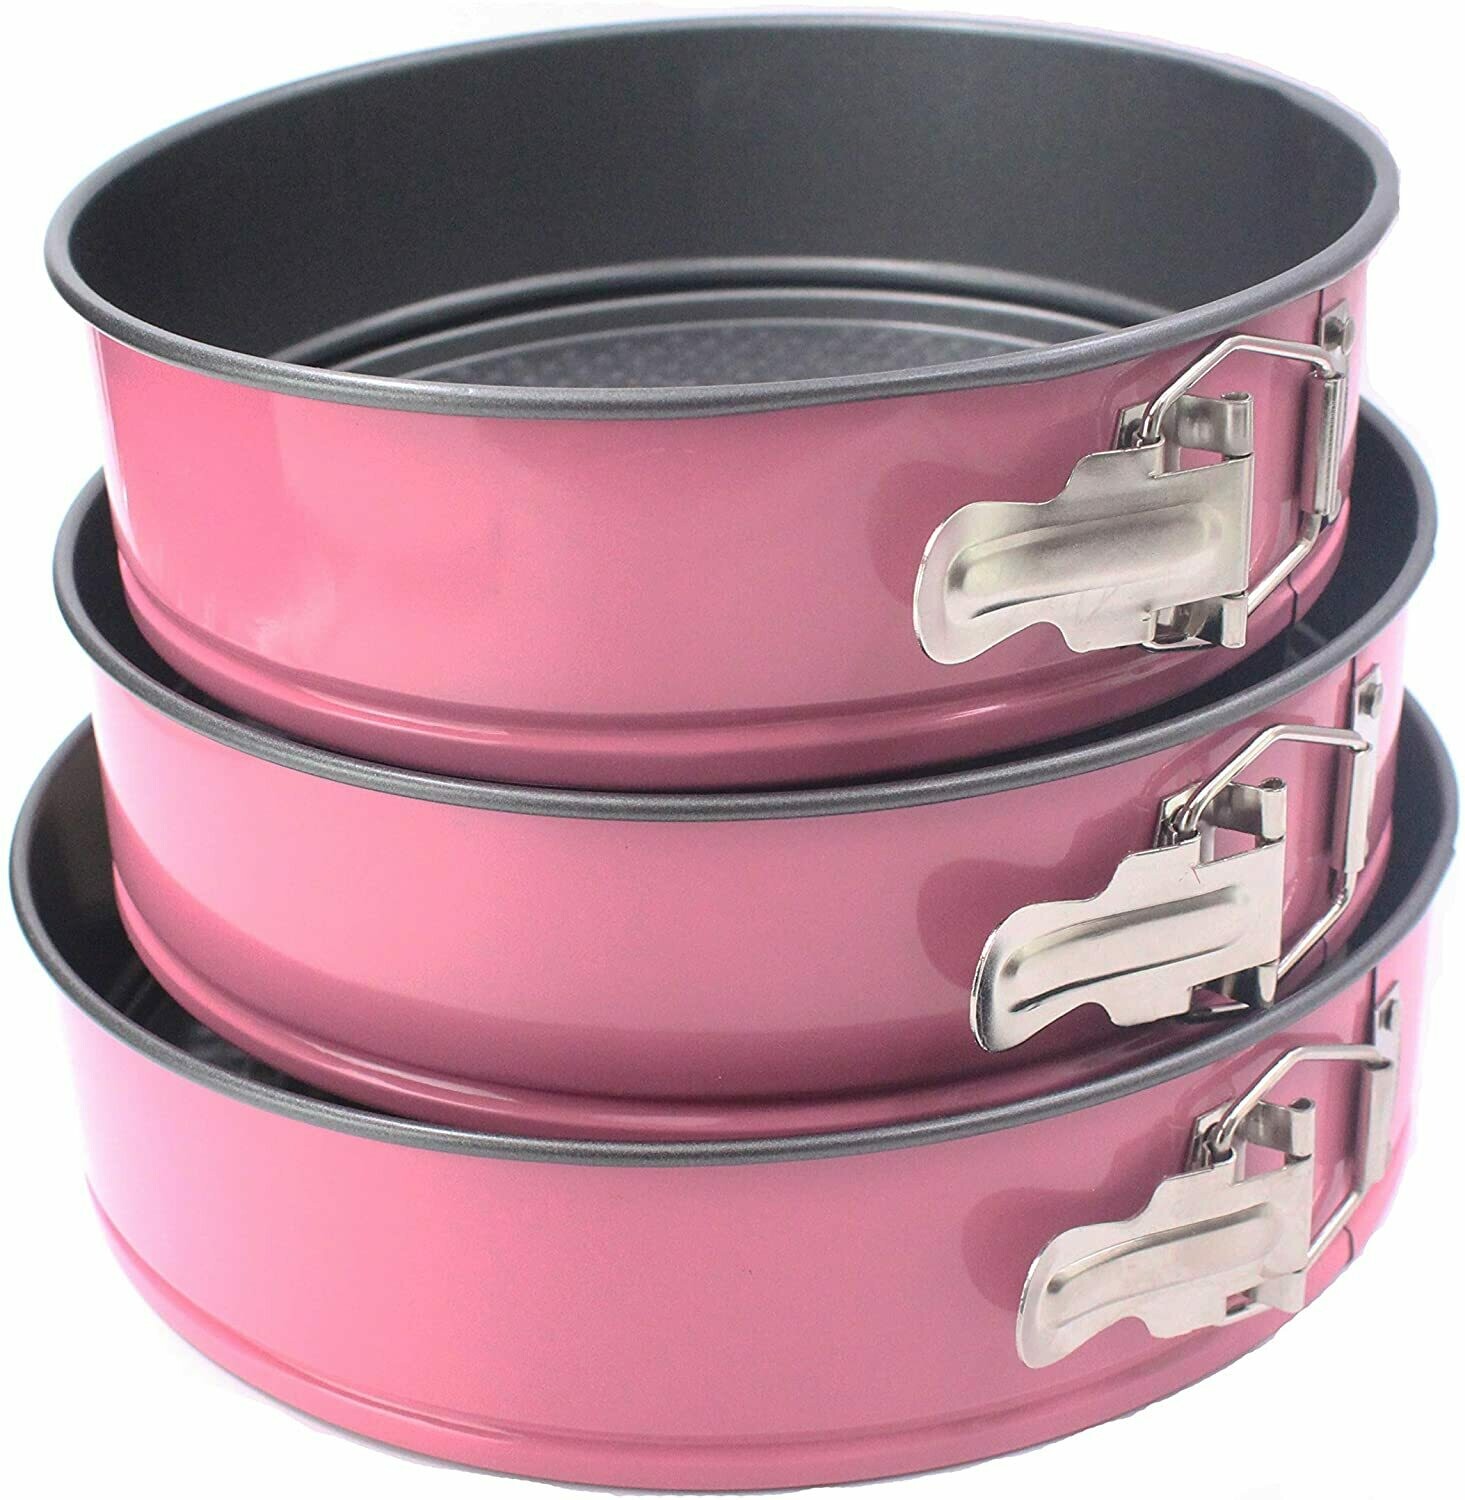 Baking Springform Round oven Pan Set, Pink 3 Pcs 22-24-26 cm, Non-Stick Mould with Quick Release Latch and Removable Waffle Texture Bottom, Aluminum Made, Lively Pink Color,